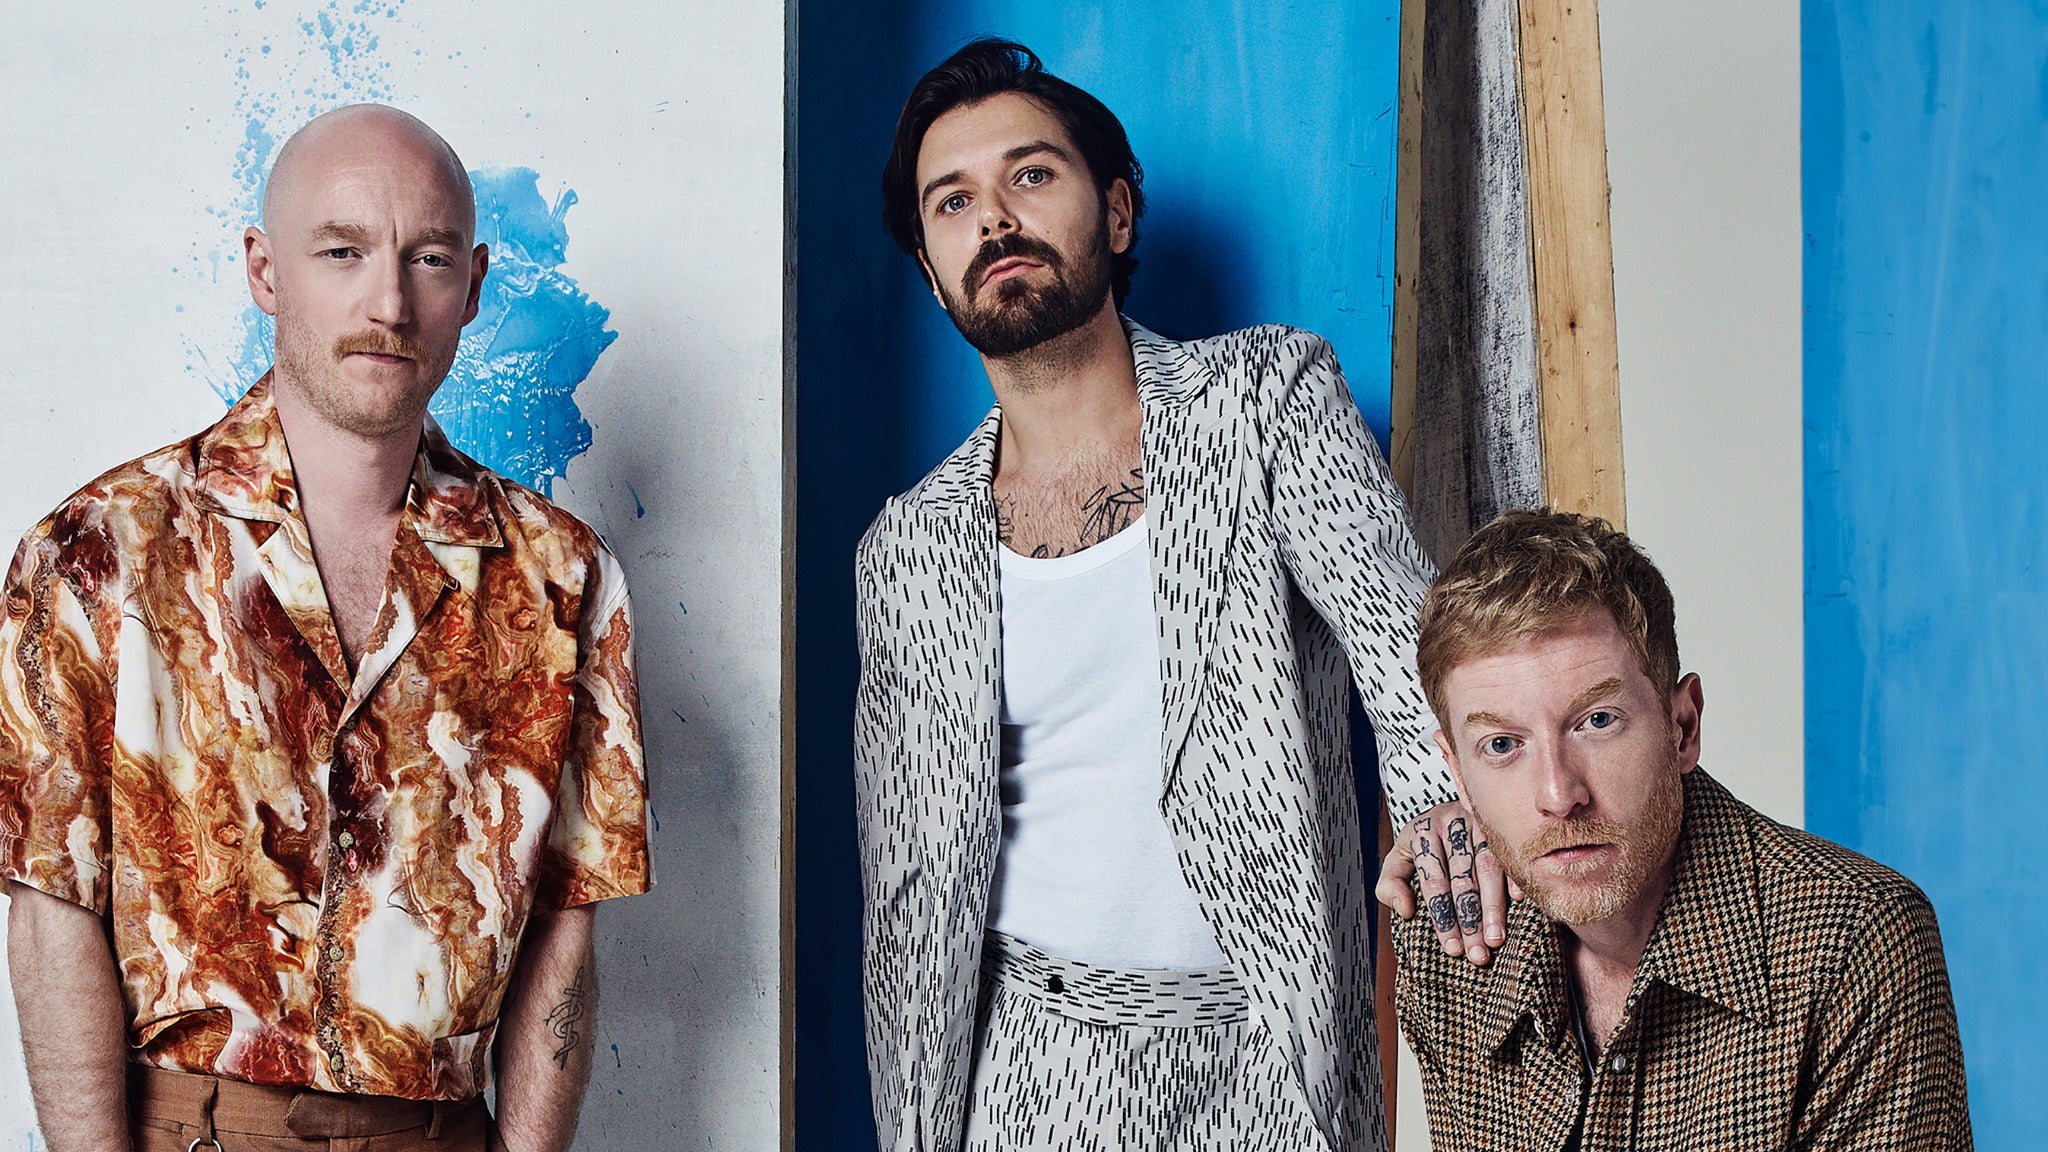 Biffy Clyro pre-sale password for early tickets in Boston